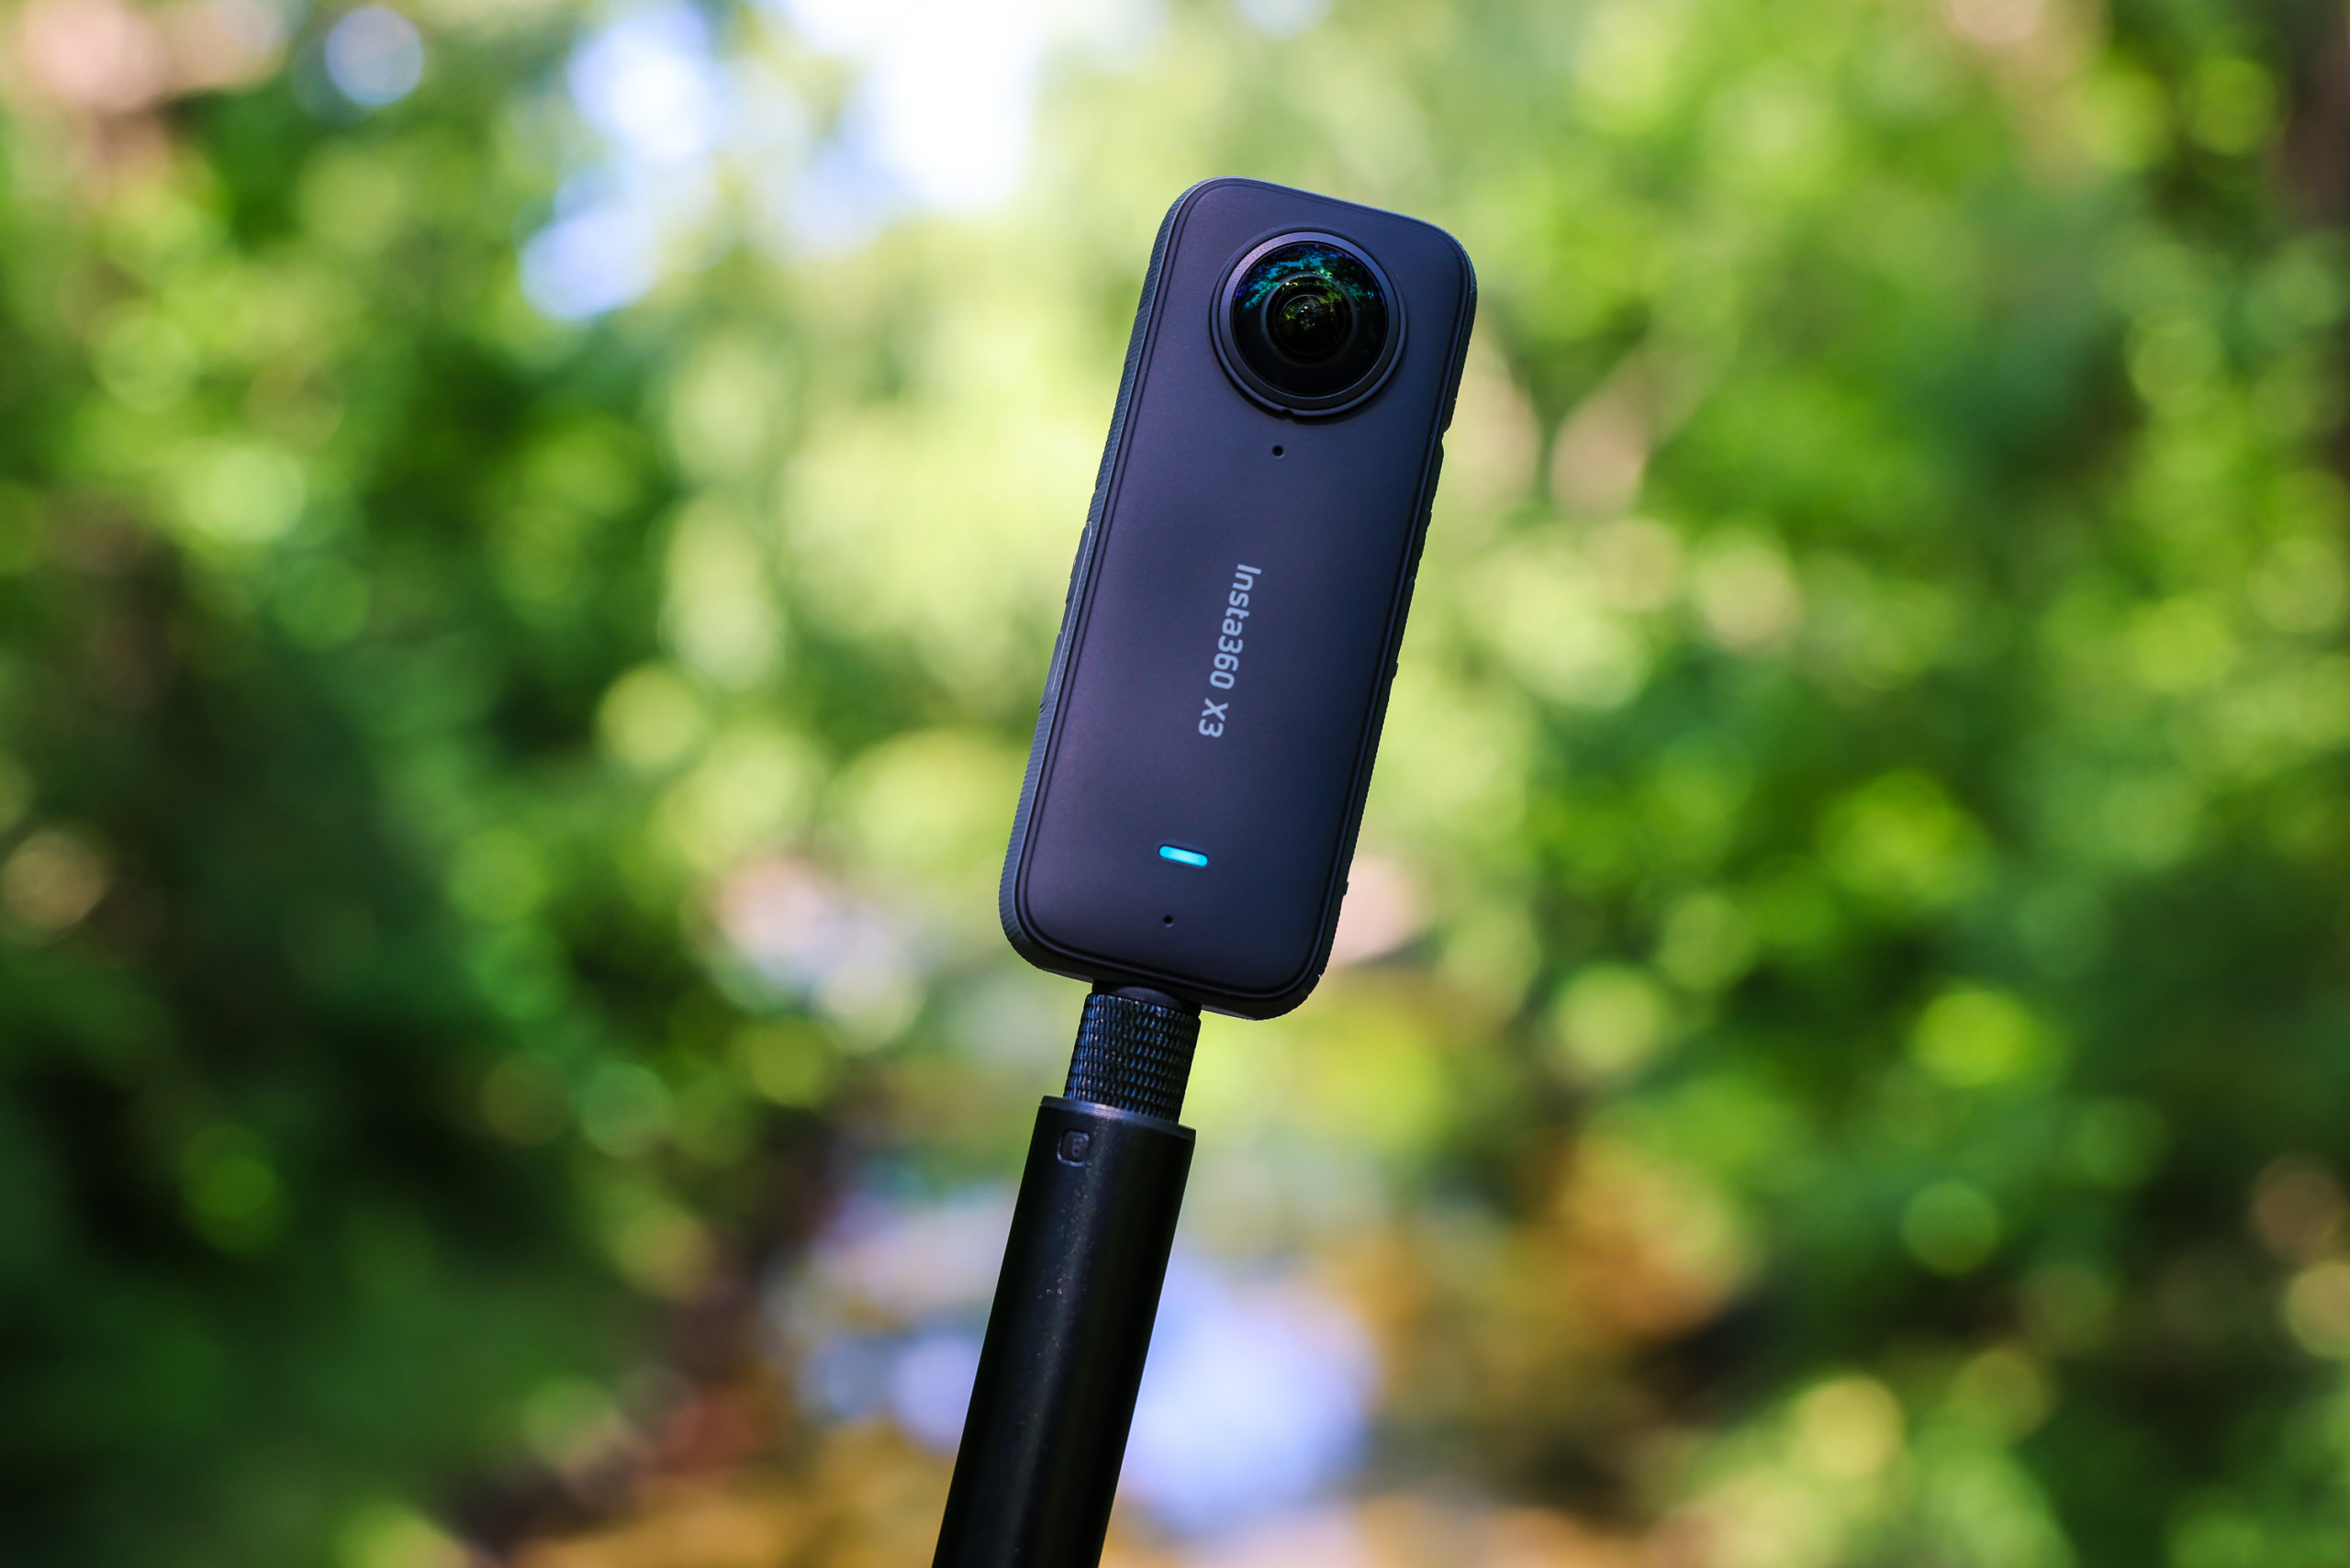 What is the image quality like on the Insta360 One X3?